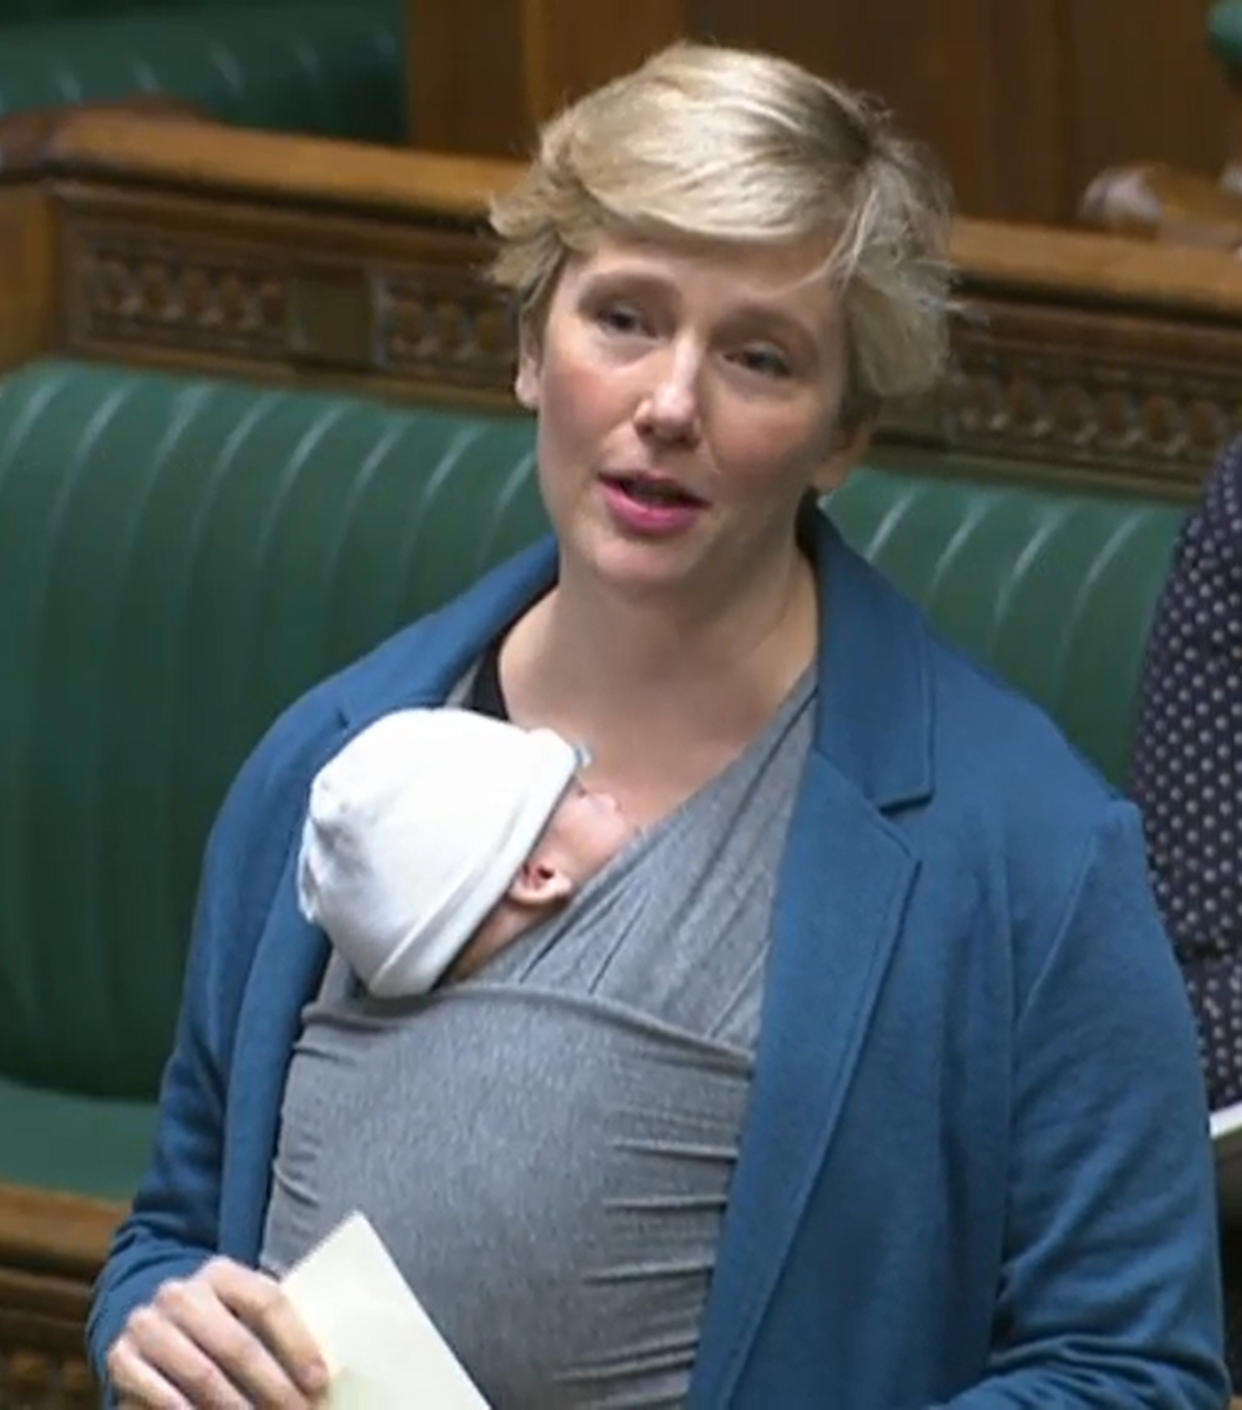 Creasy was arguing MPs don't have the proper rights to maternity leave. (PA)